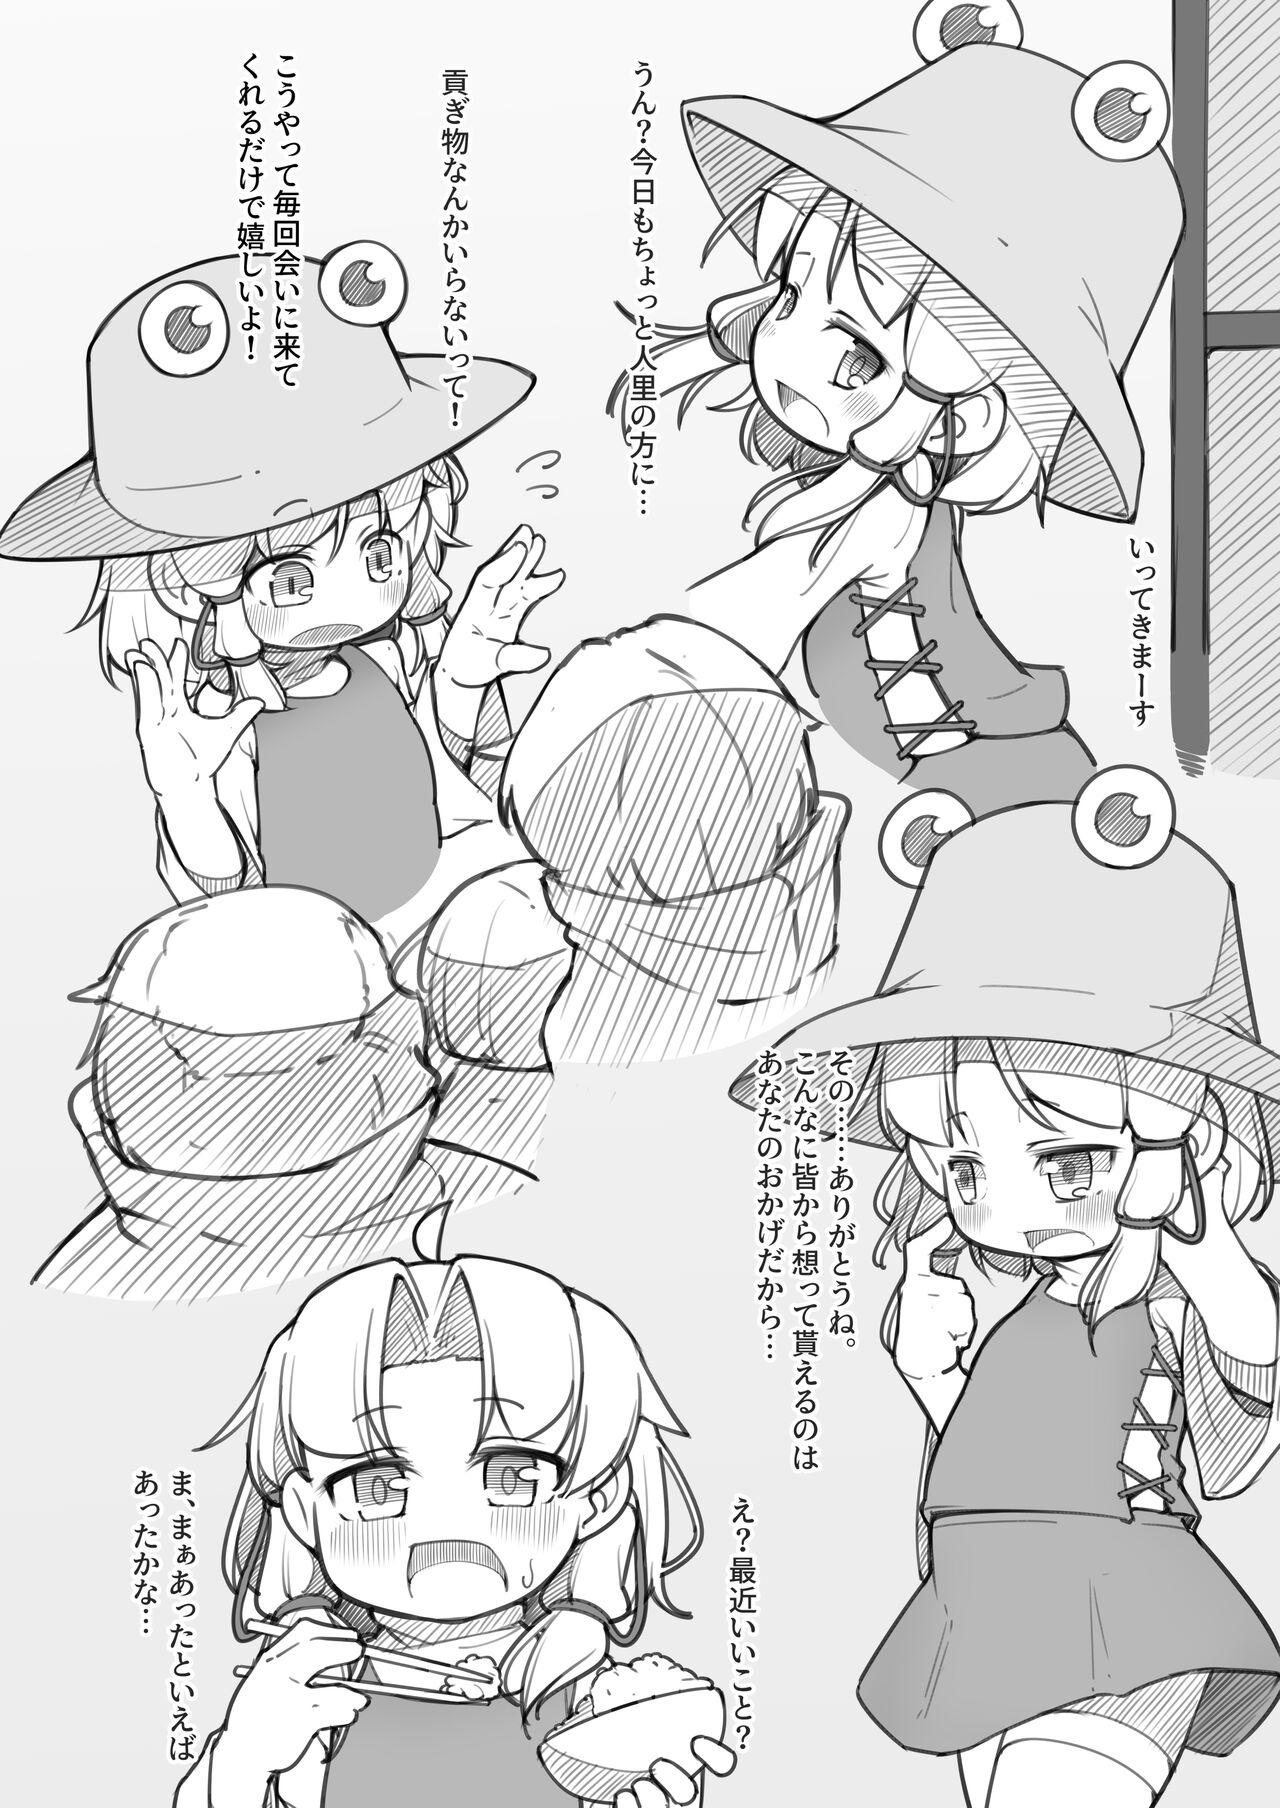 Bed 幻想入りしたカリスマ教祖に諏訪子さまが祀り上げられる話 - Touhou project Butt Sex - Page 5